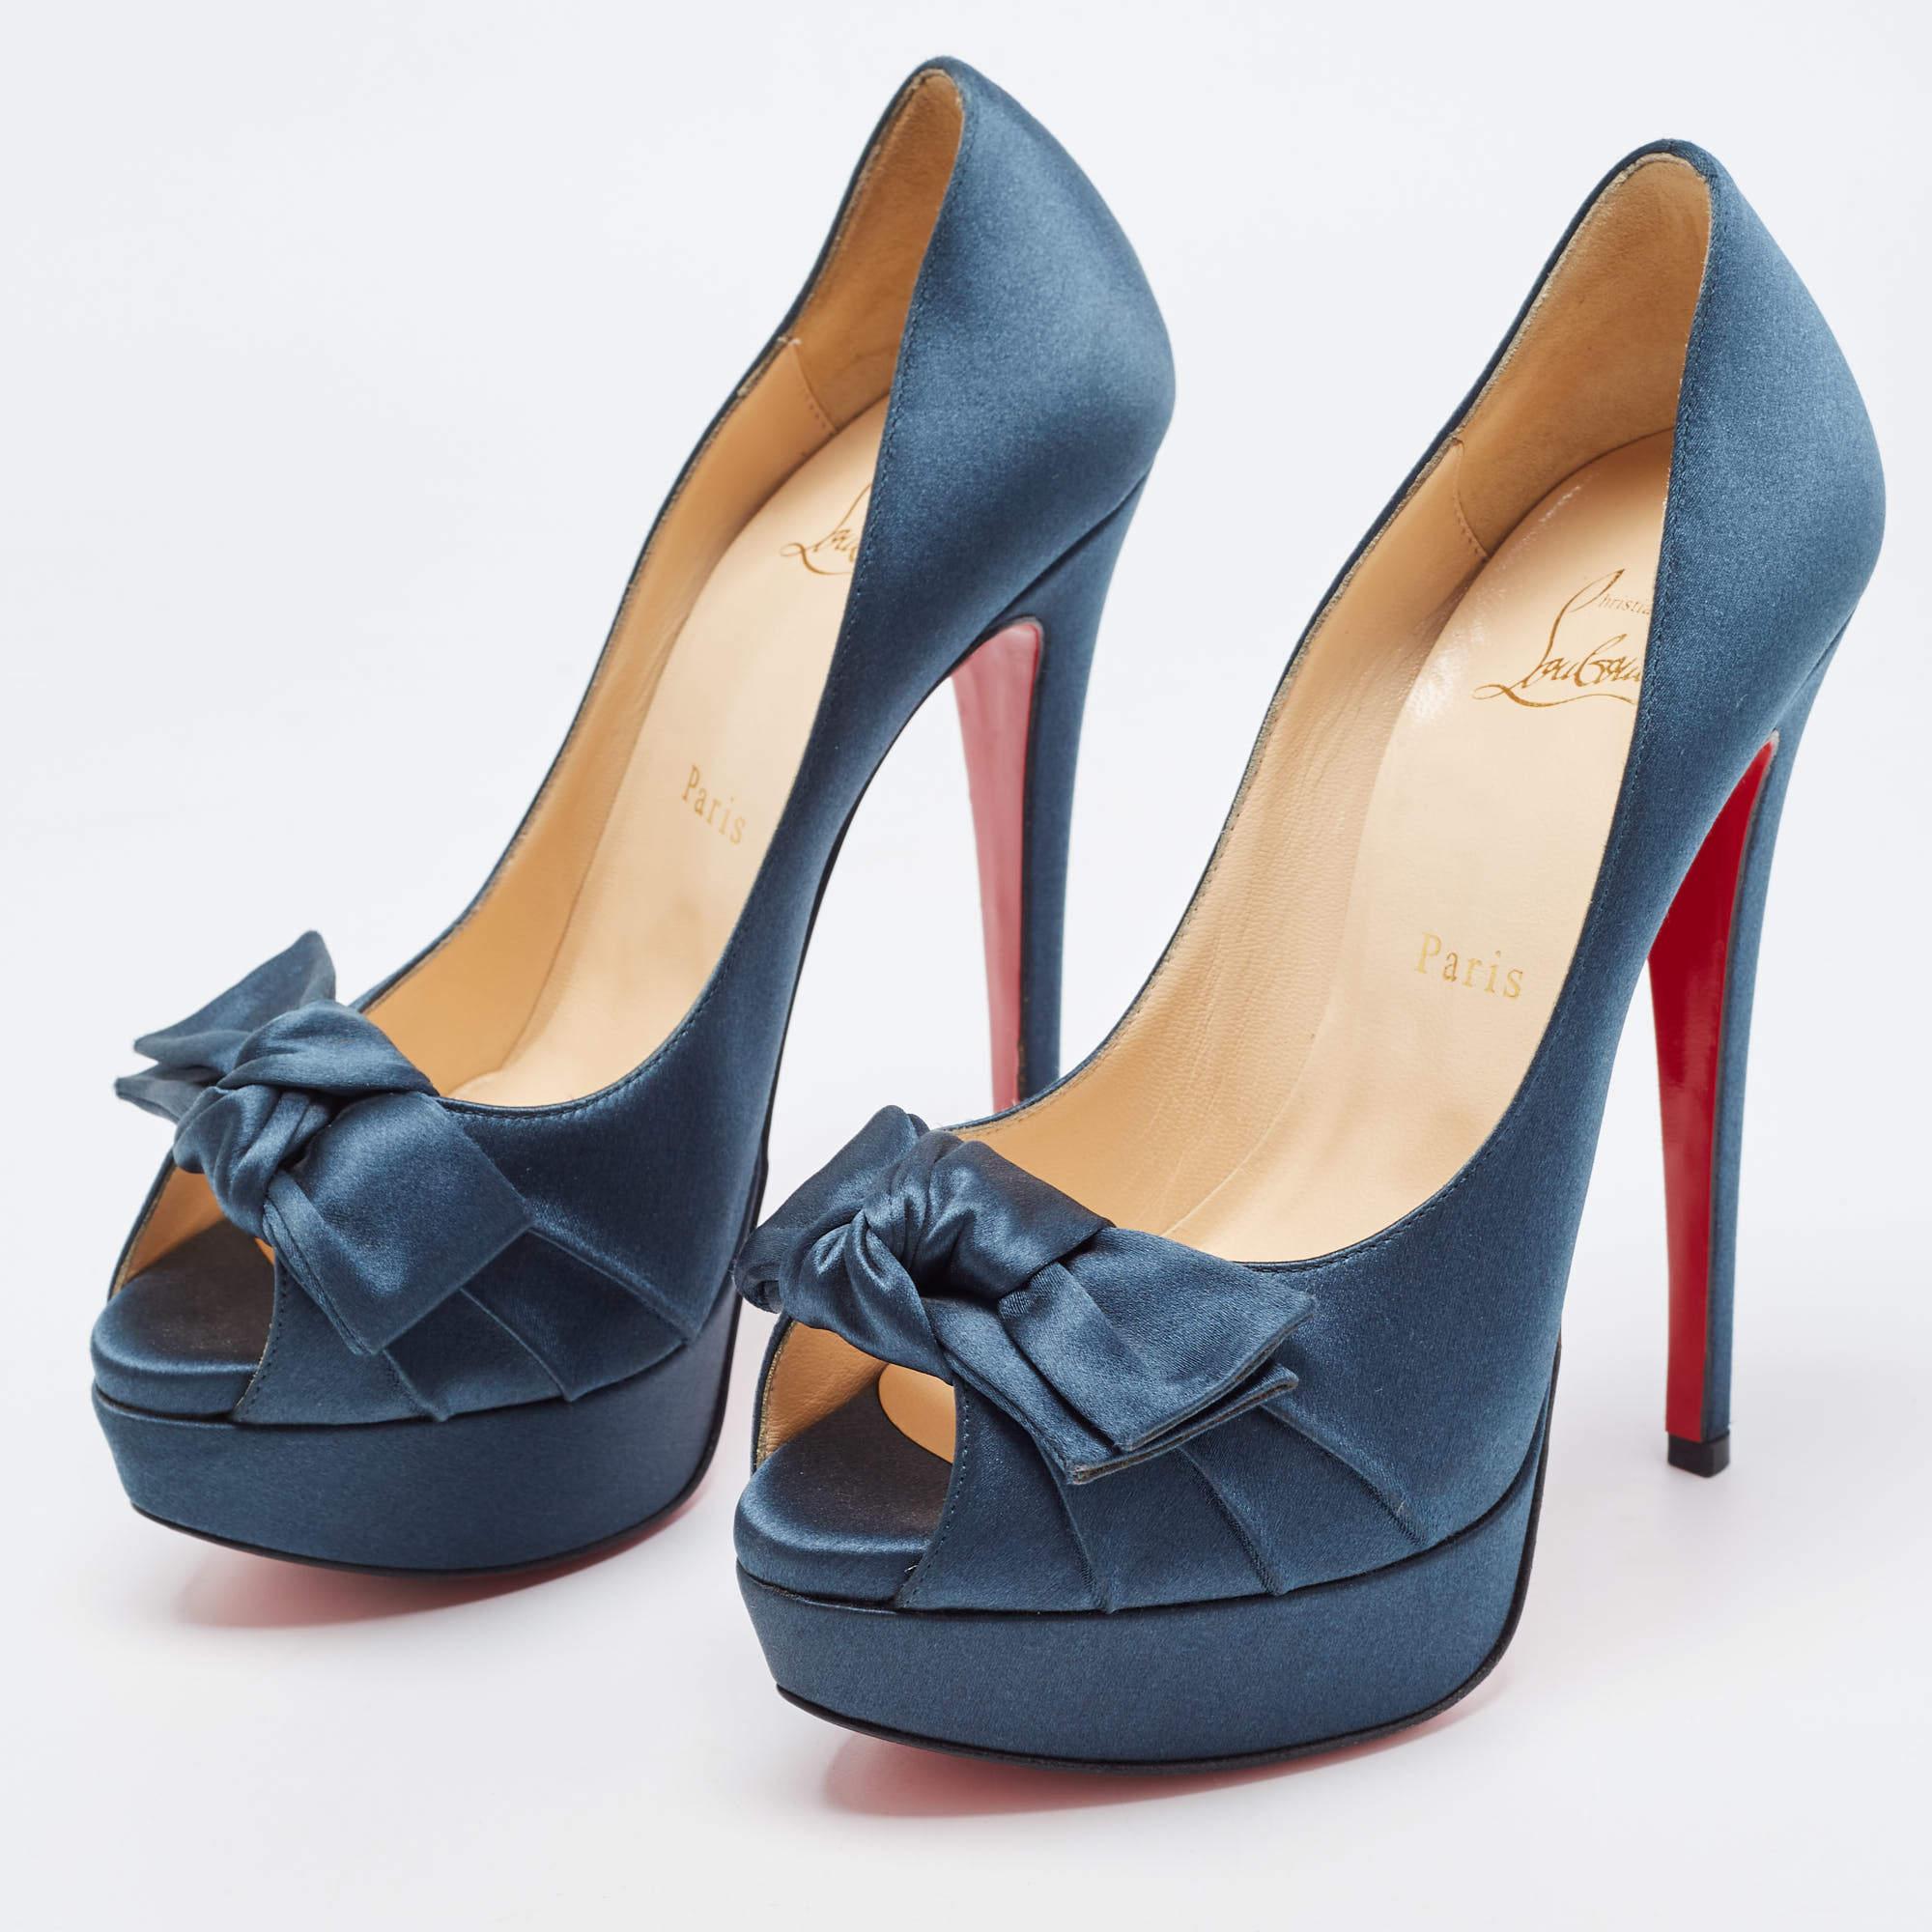 Women's Christian Louboutin Teal Satin Madame Butterfly Pumps Size 37 For Sale